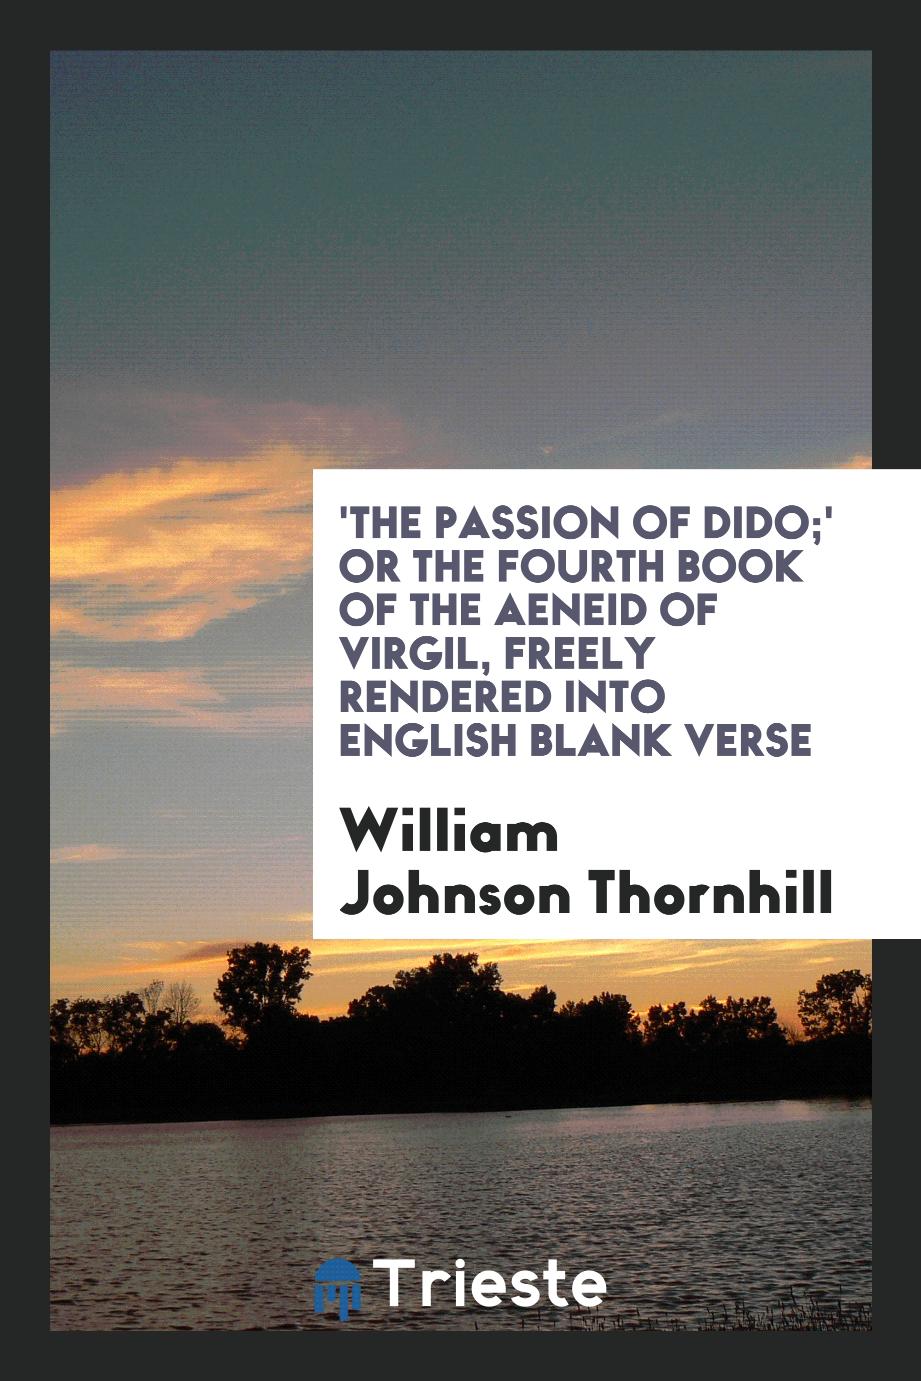 'The passion of Dido;' or The fourth book of the Aeneid of Virgil, freely rendered into English blank verse